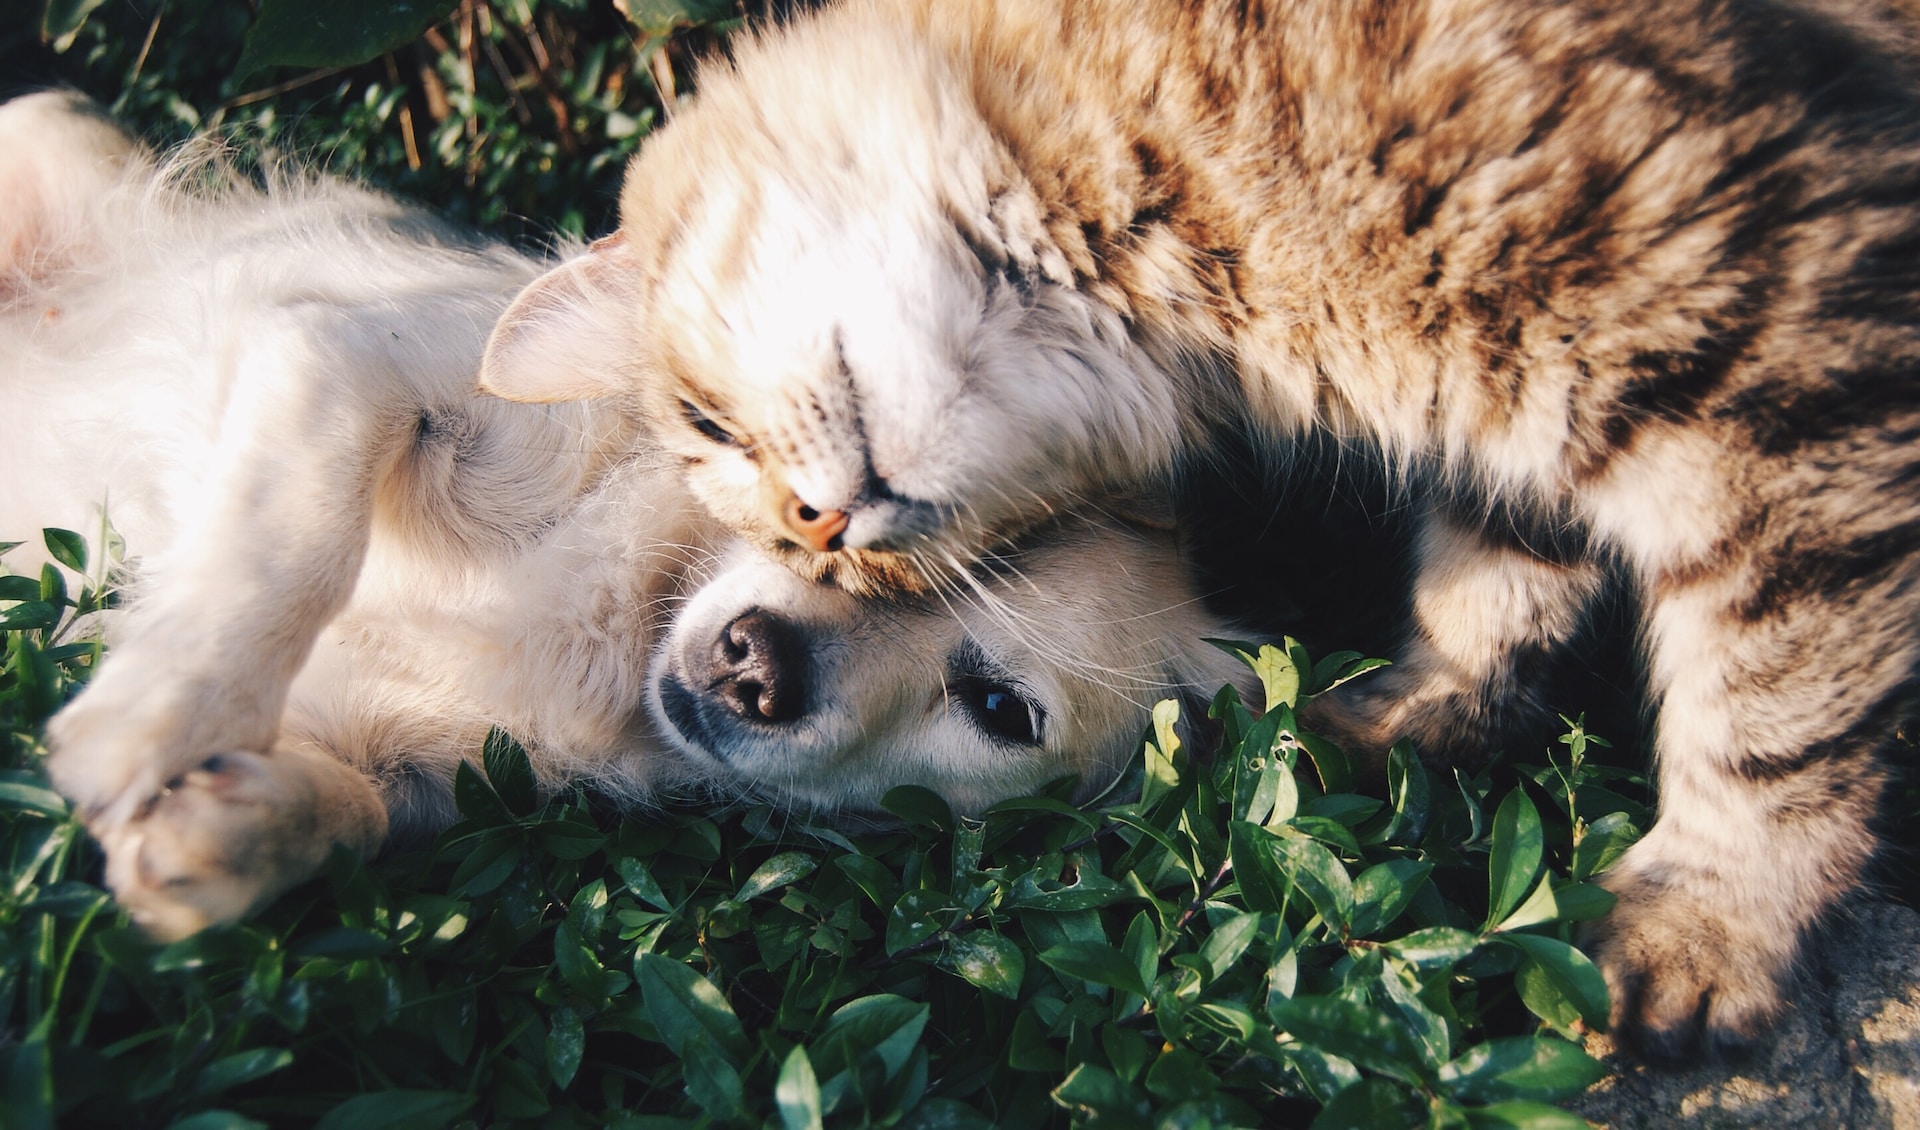 dog and cat cuddling outdoors on grass